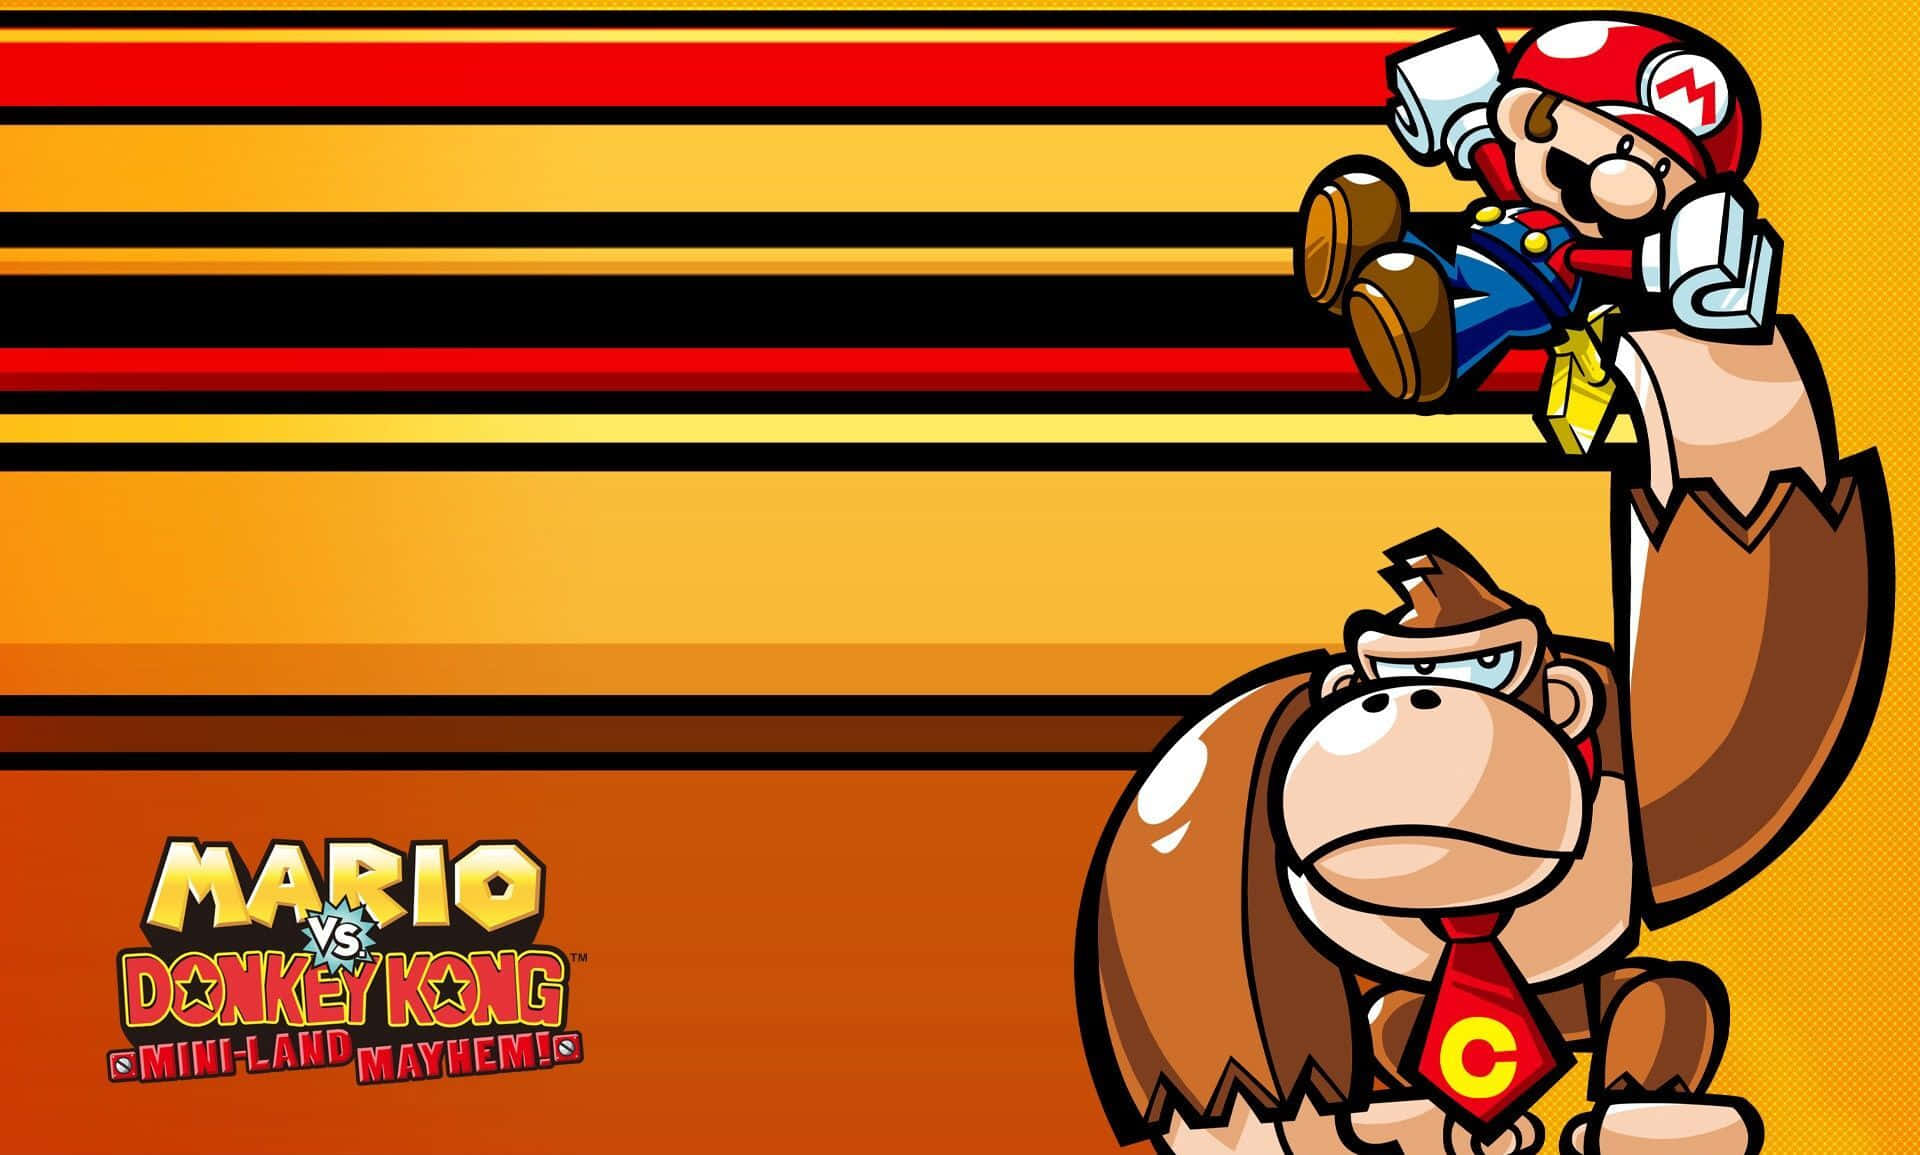 Donkey Kong dominating the game in a thrilling action-packed scene Wallpaper